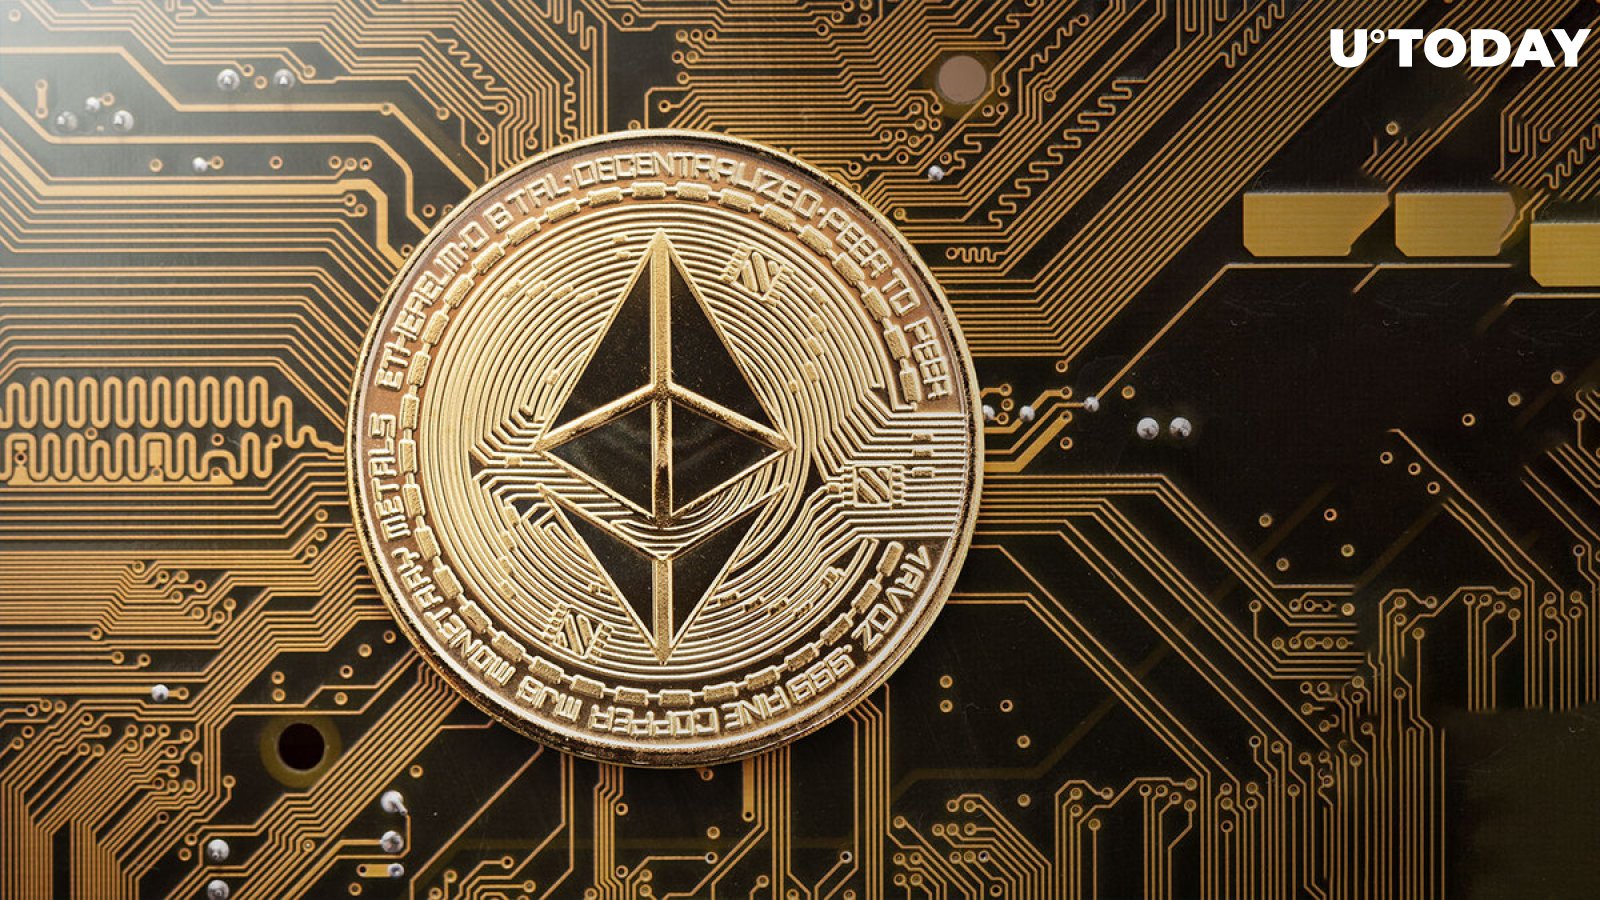 Here's Who Caused Enormous Spike in Ethereum Selling Pressure This Past Weekend